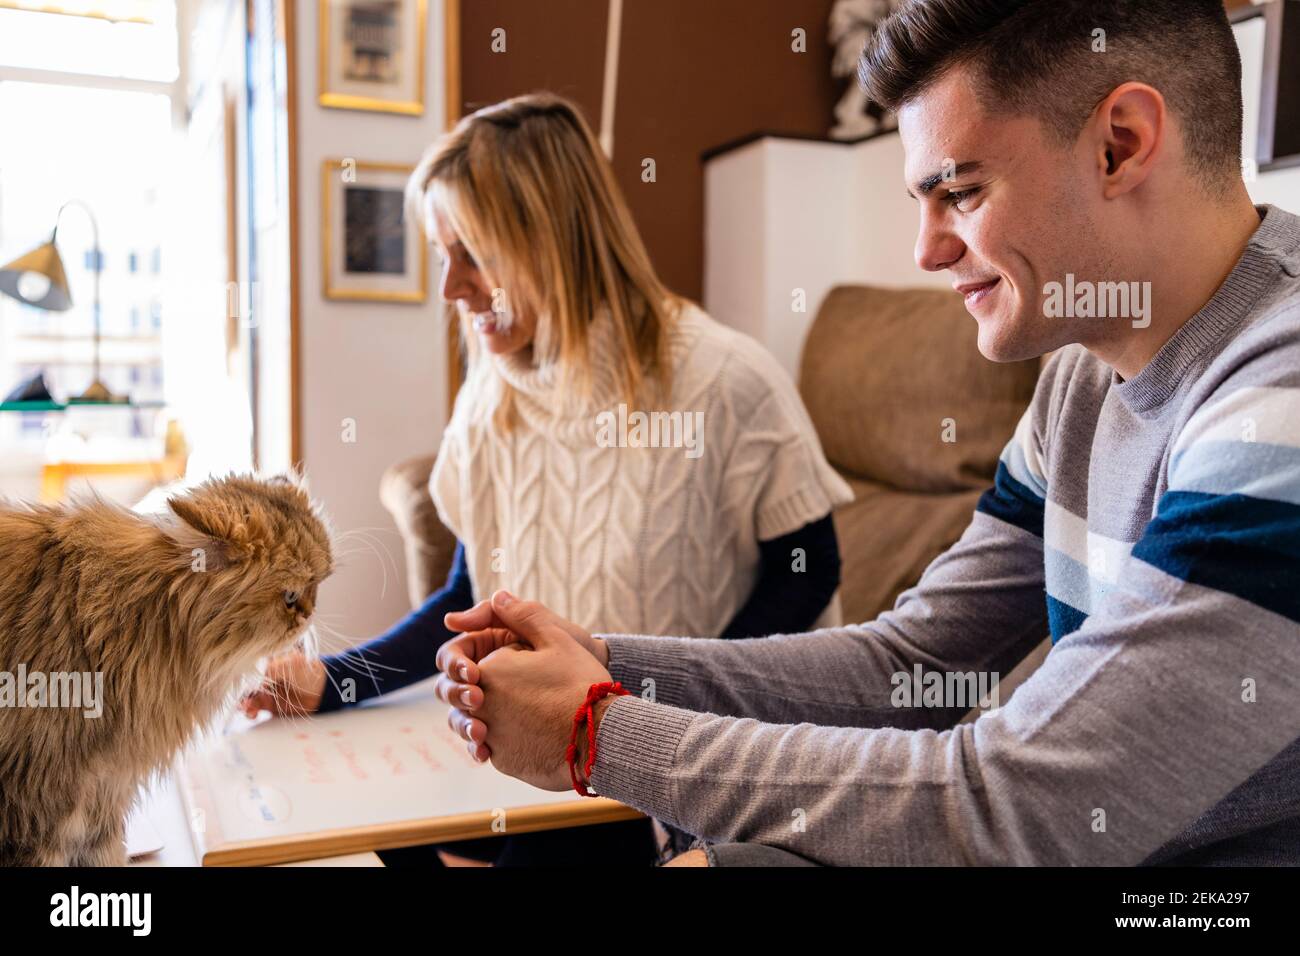 Smiling young patient looking at cat while sitting with counselor during session at work place Stock Photo